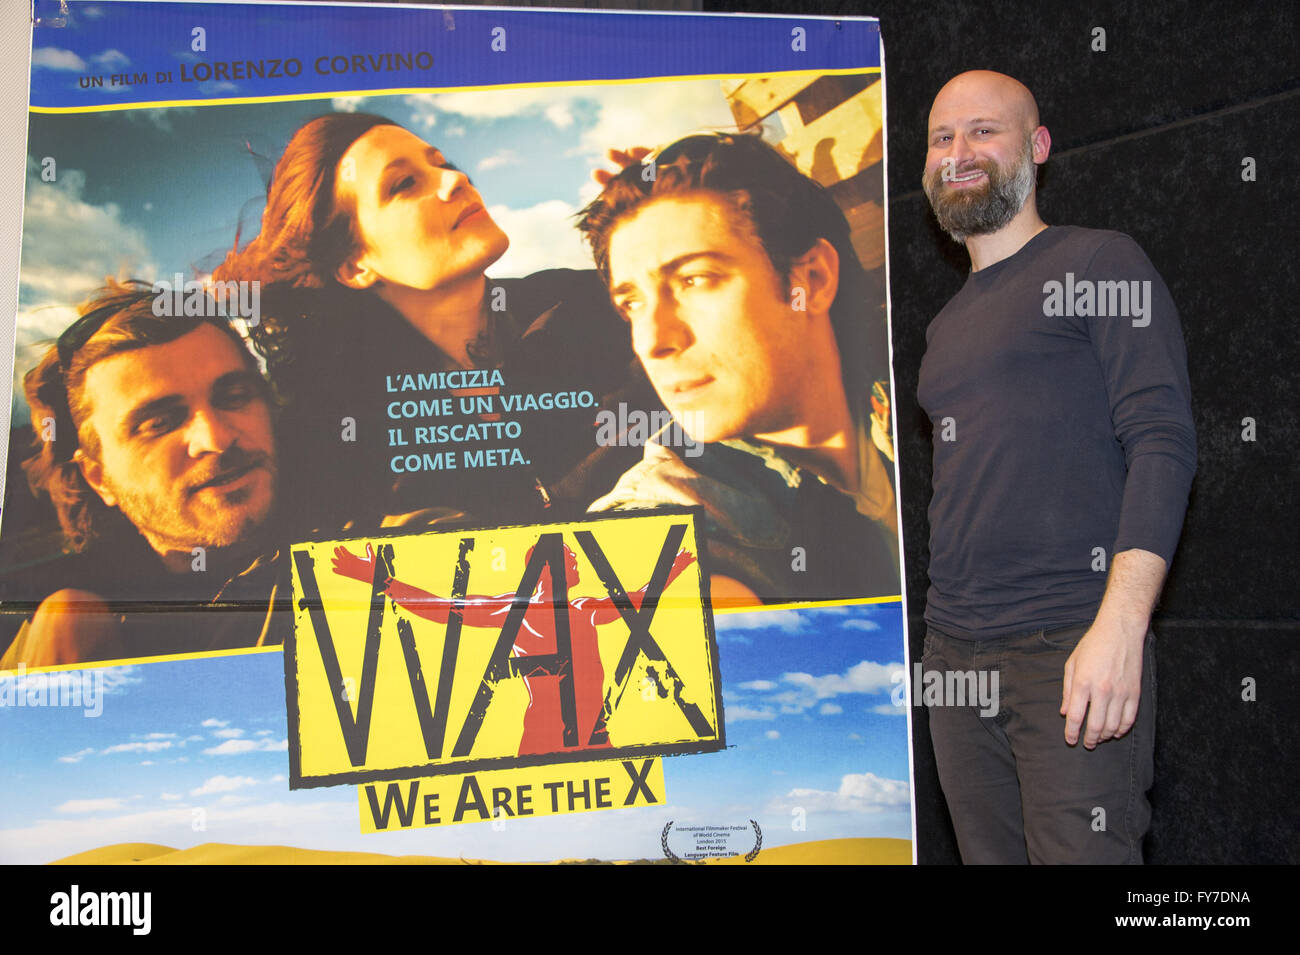 Wax: We Are The X' photocall in Rome Featuring: Lorenzo Corvino Where:  Rome, Italy When: 16 Mar 2016 Stock Photo - Alamy